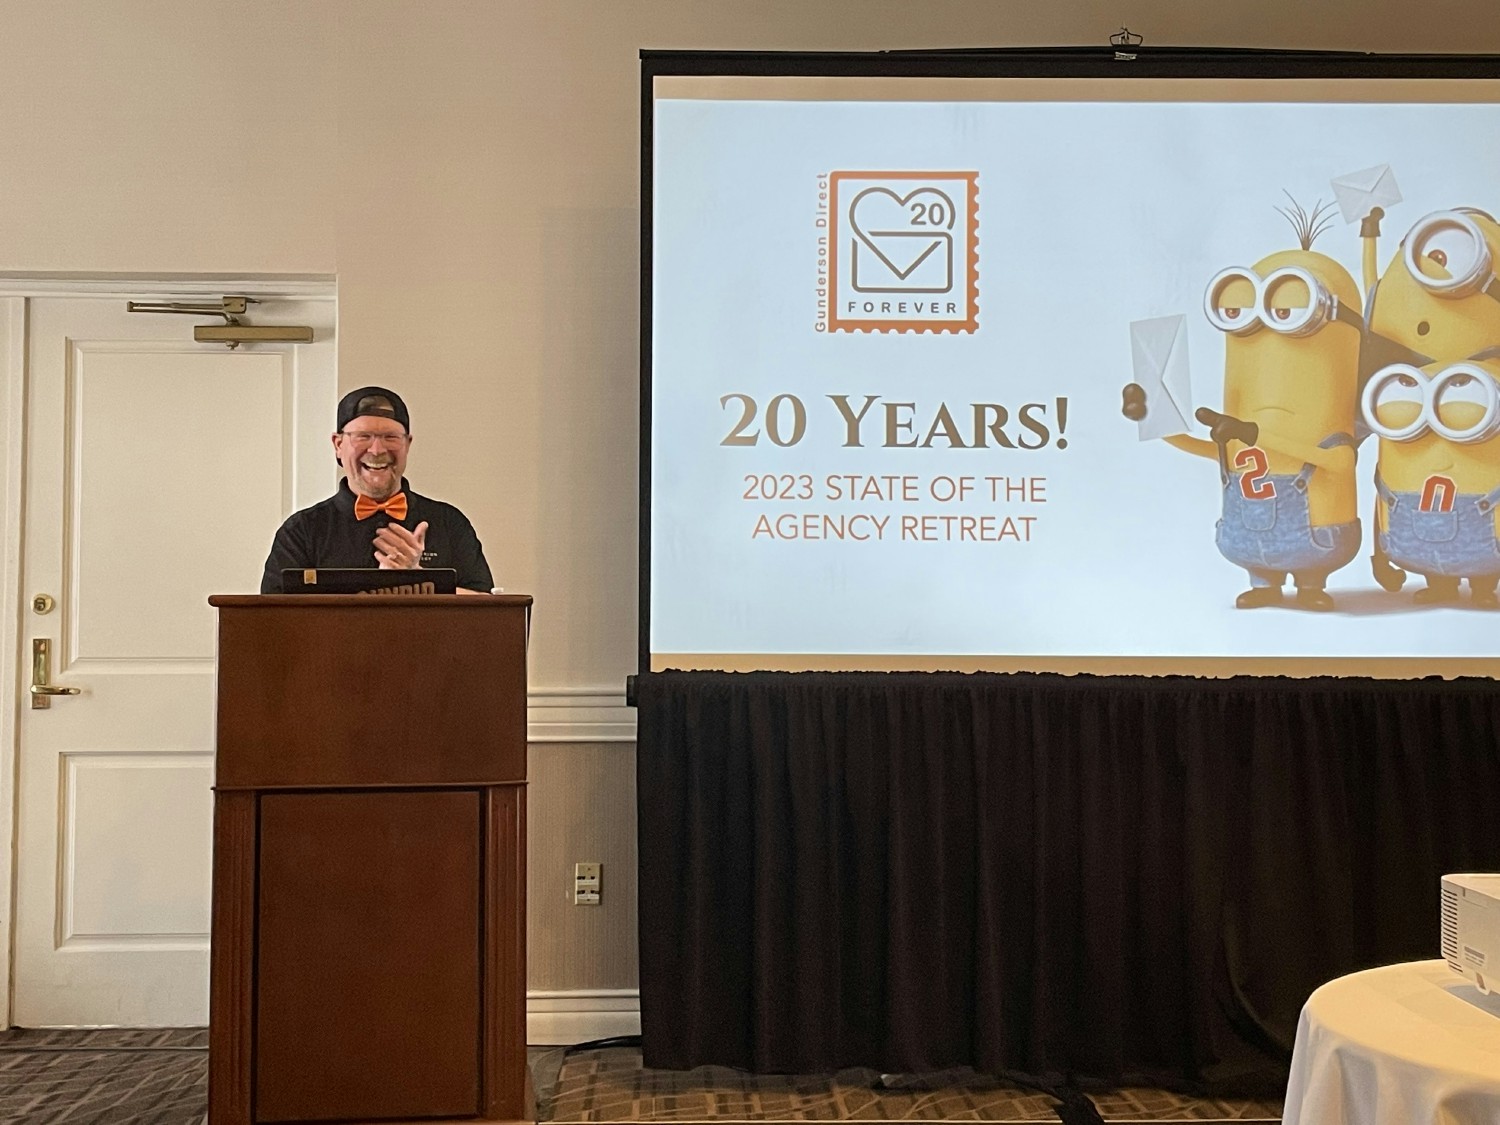 President Mike Gunderson giving a State of the Agency presentation during our 20th anniversary weekend in Hollywood